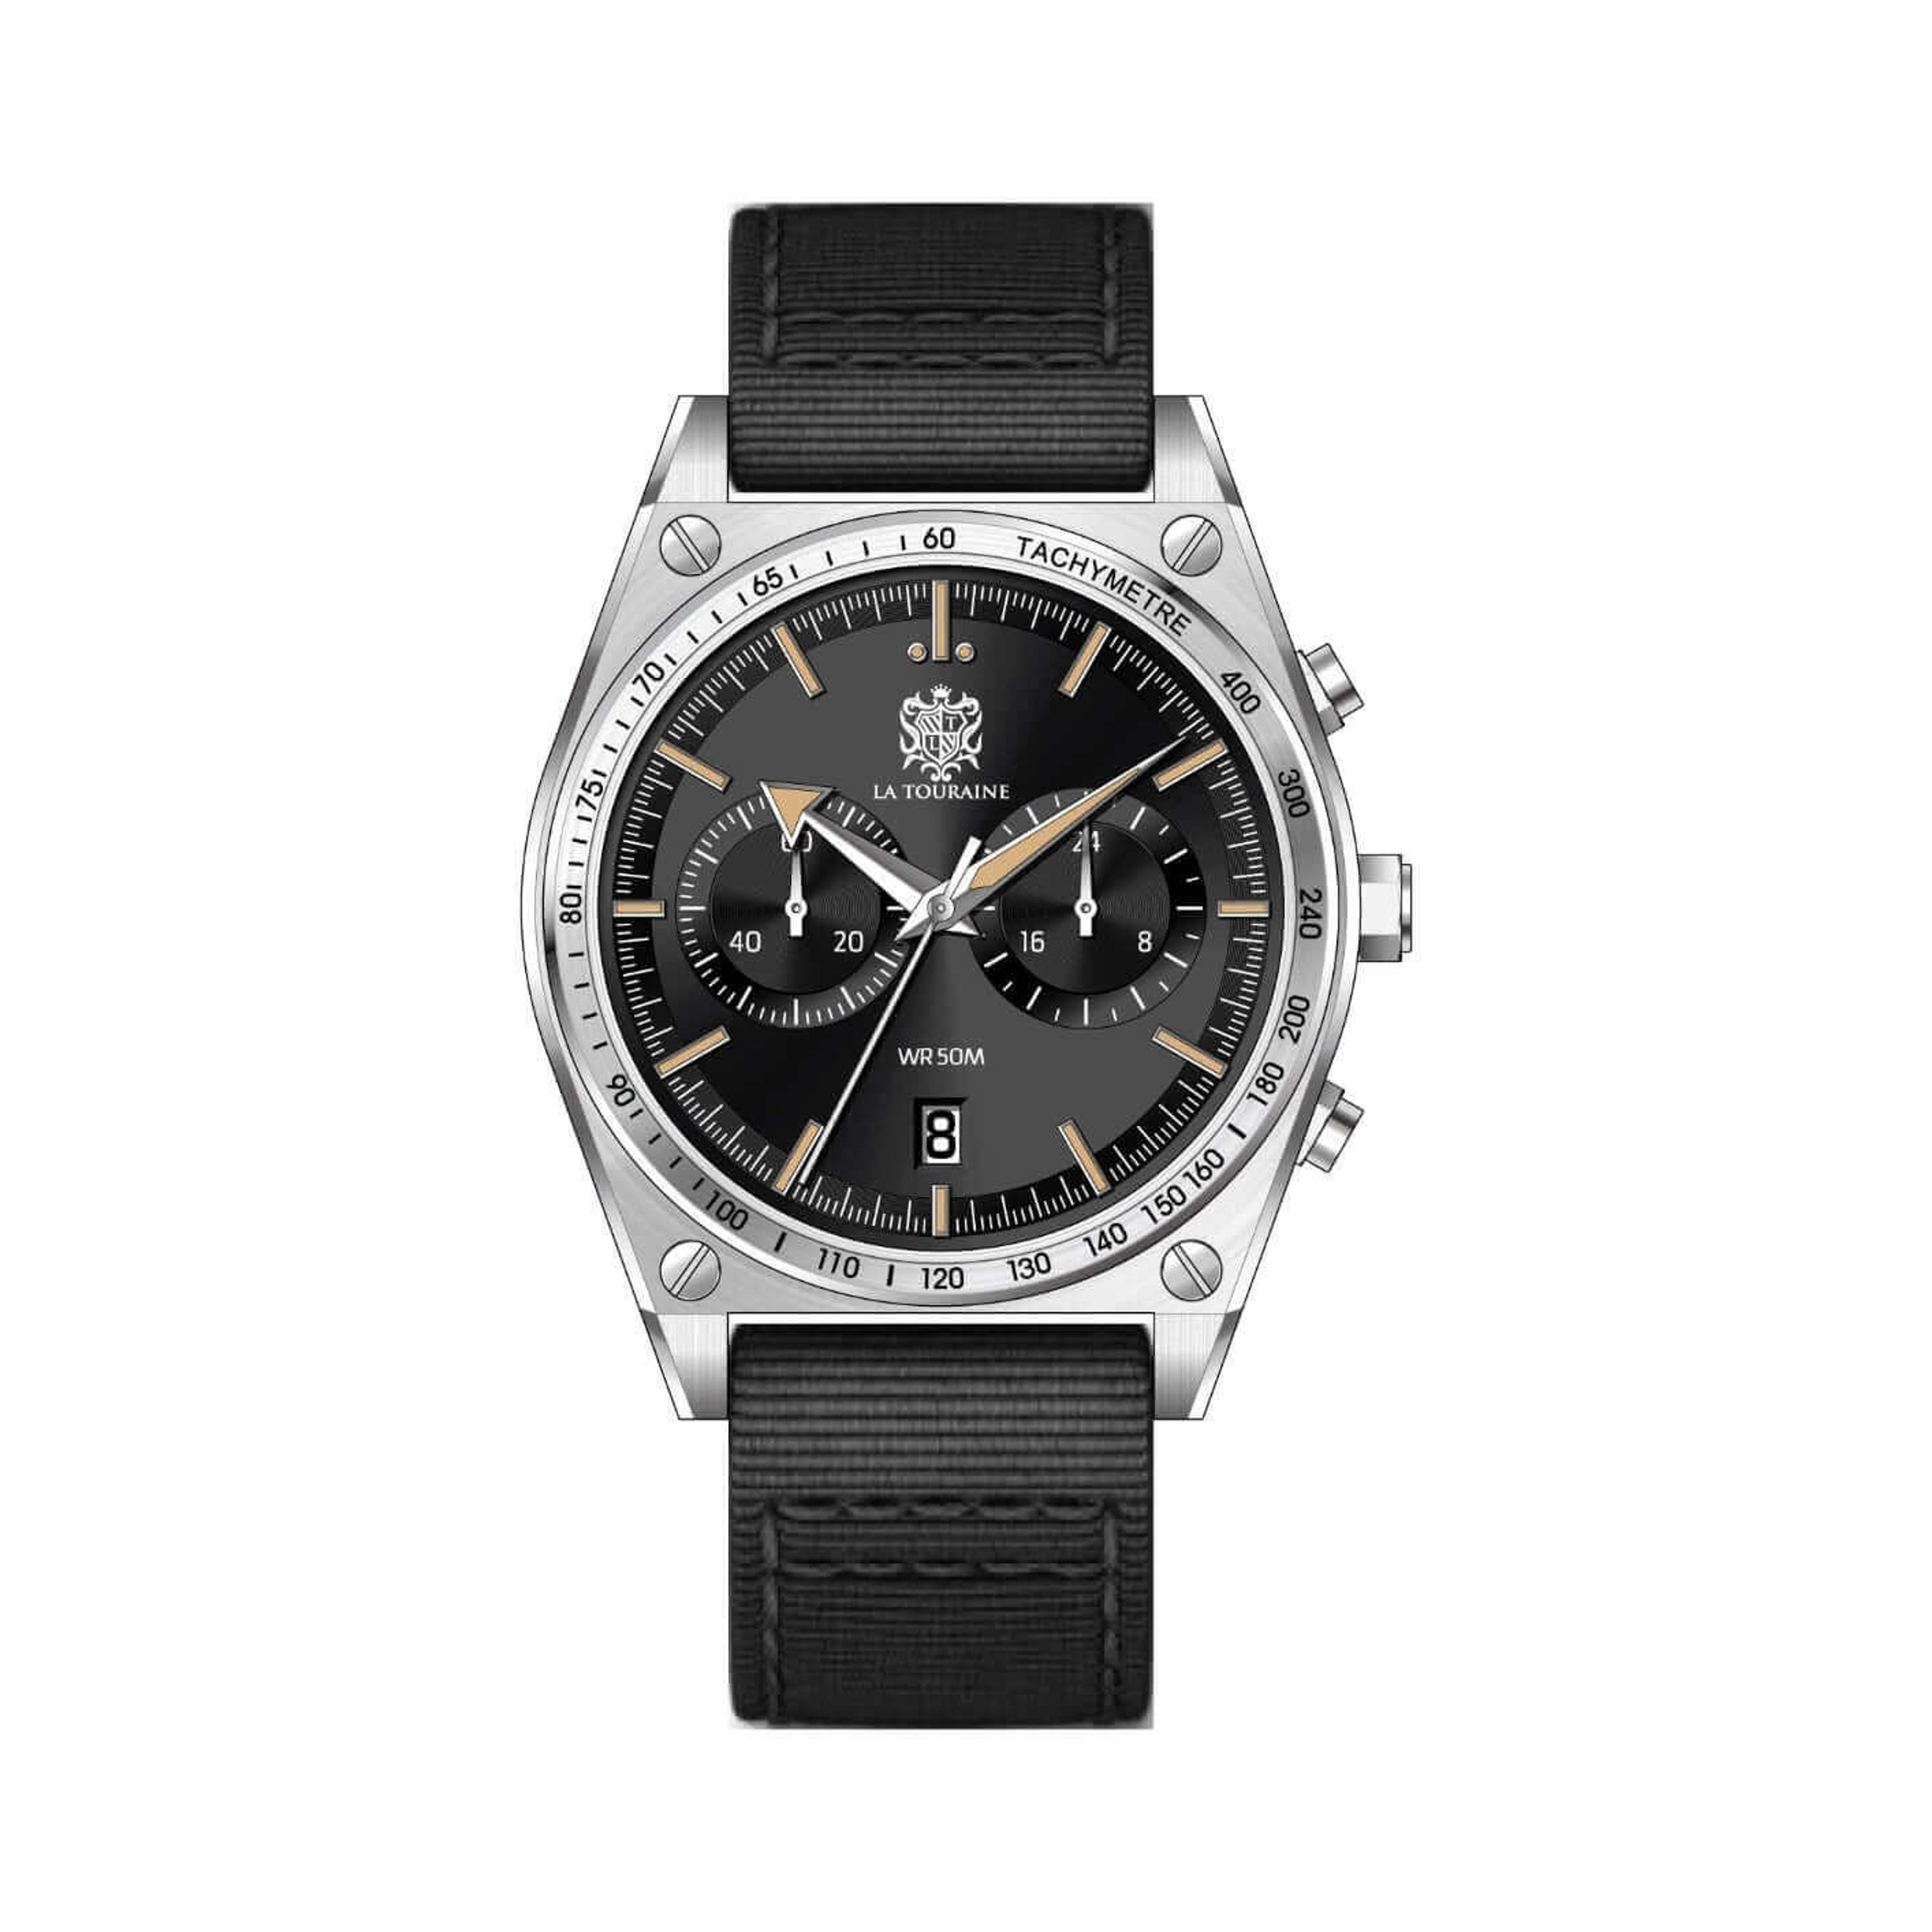 Cartographer | Affordable Tachymeter Watch